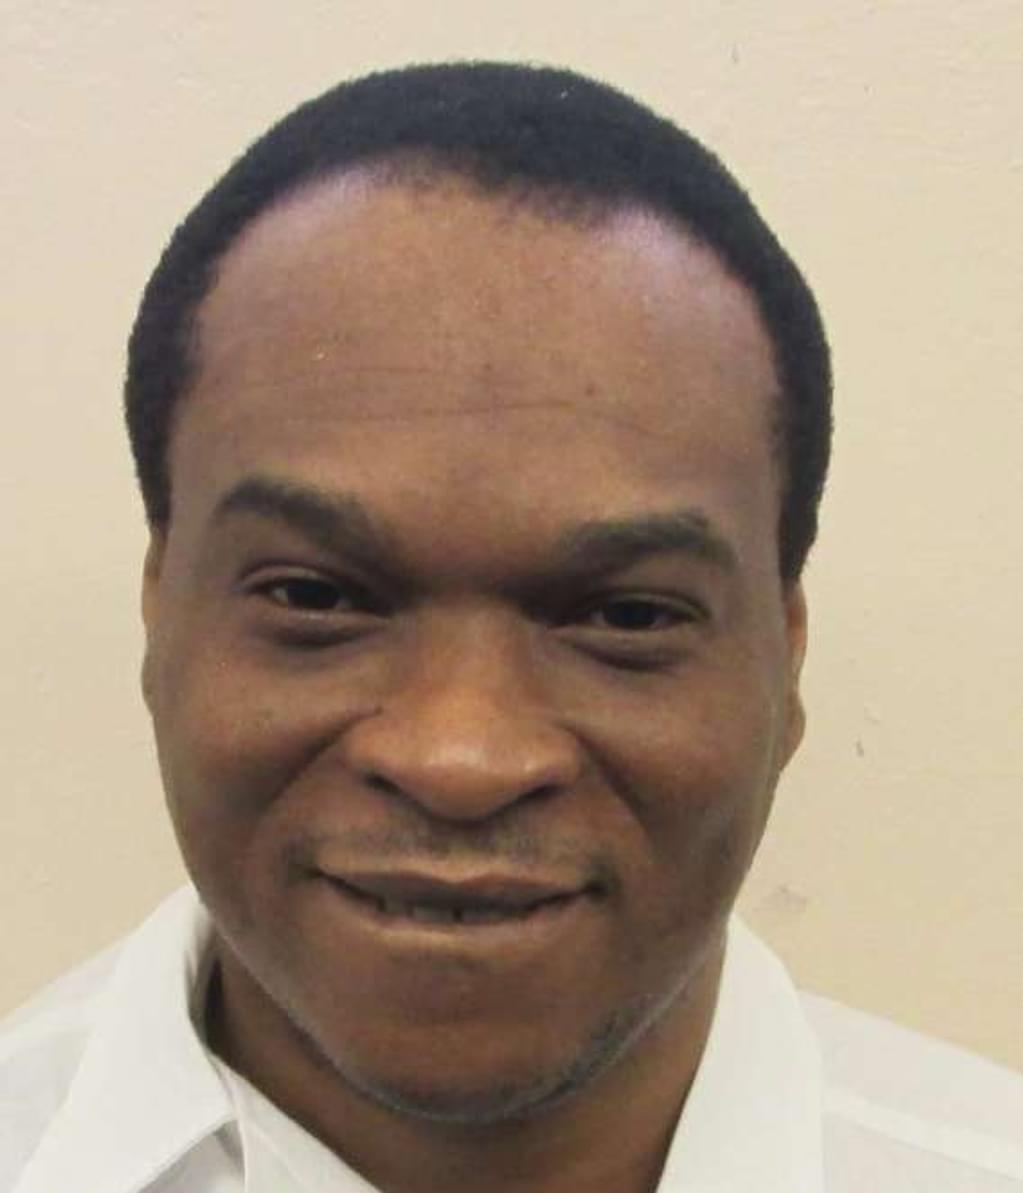 Federal Court Grants Lethal-Injection Stay to Alabama Prisoner With Claims of Attorney Abandonment, Flawed Forensics